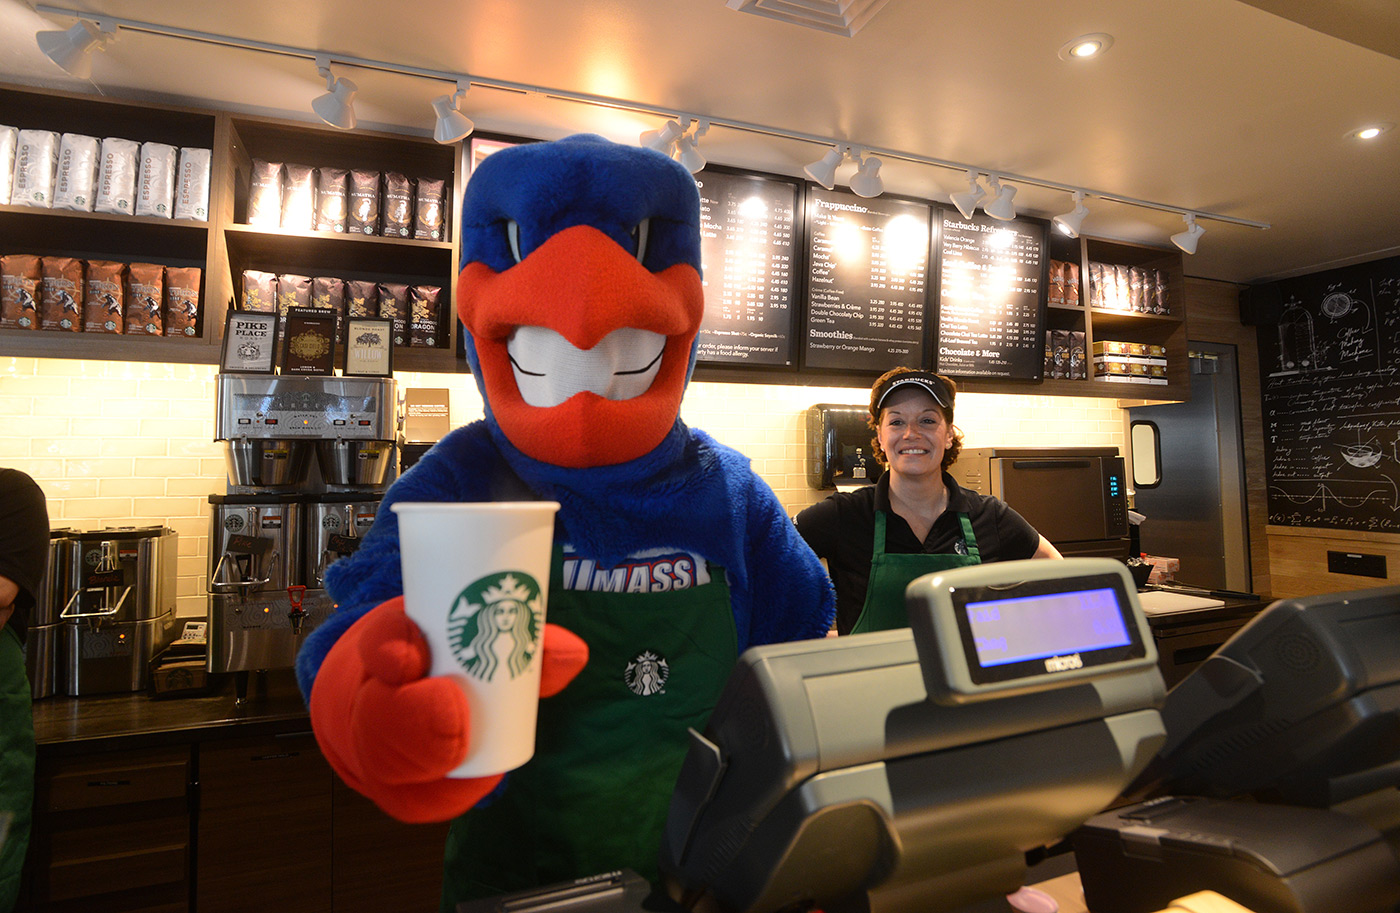 Rowdy joins the staff at the North Campus Starbucks soft opening.